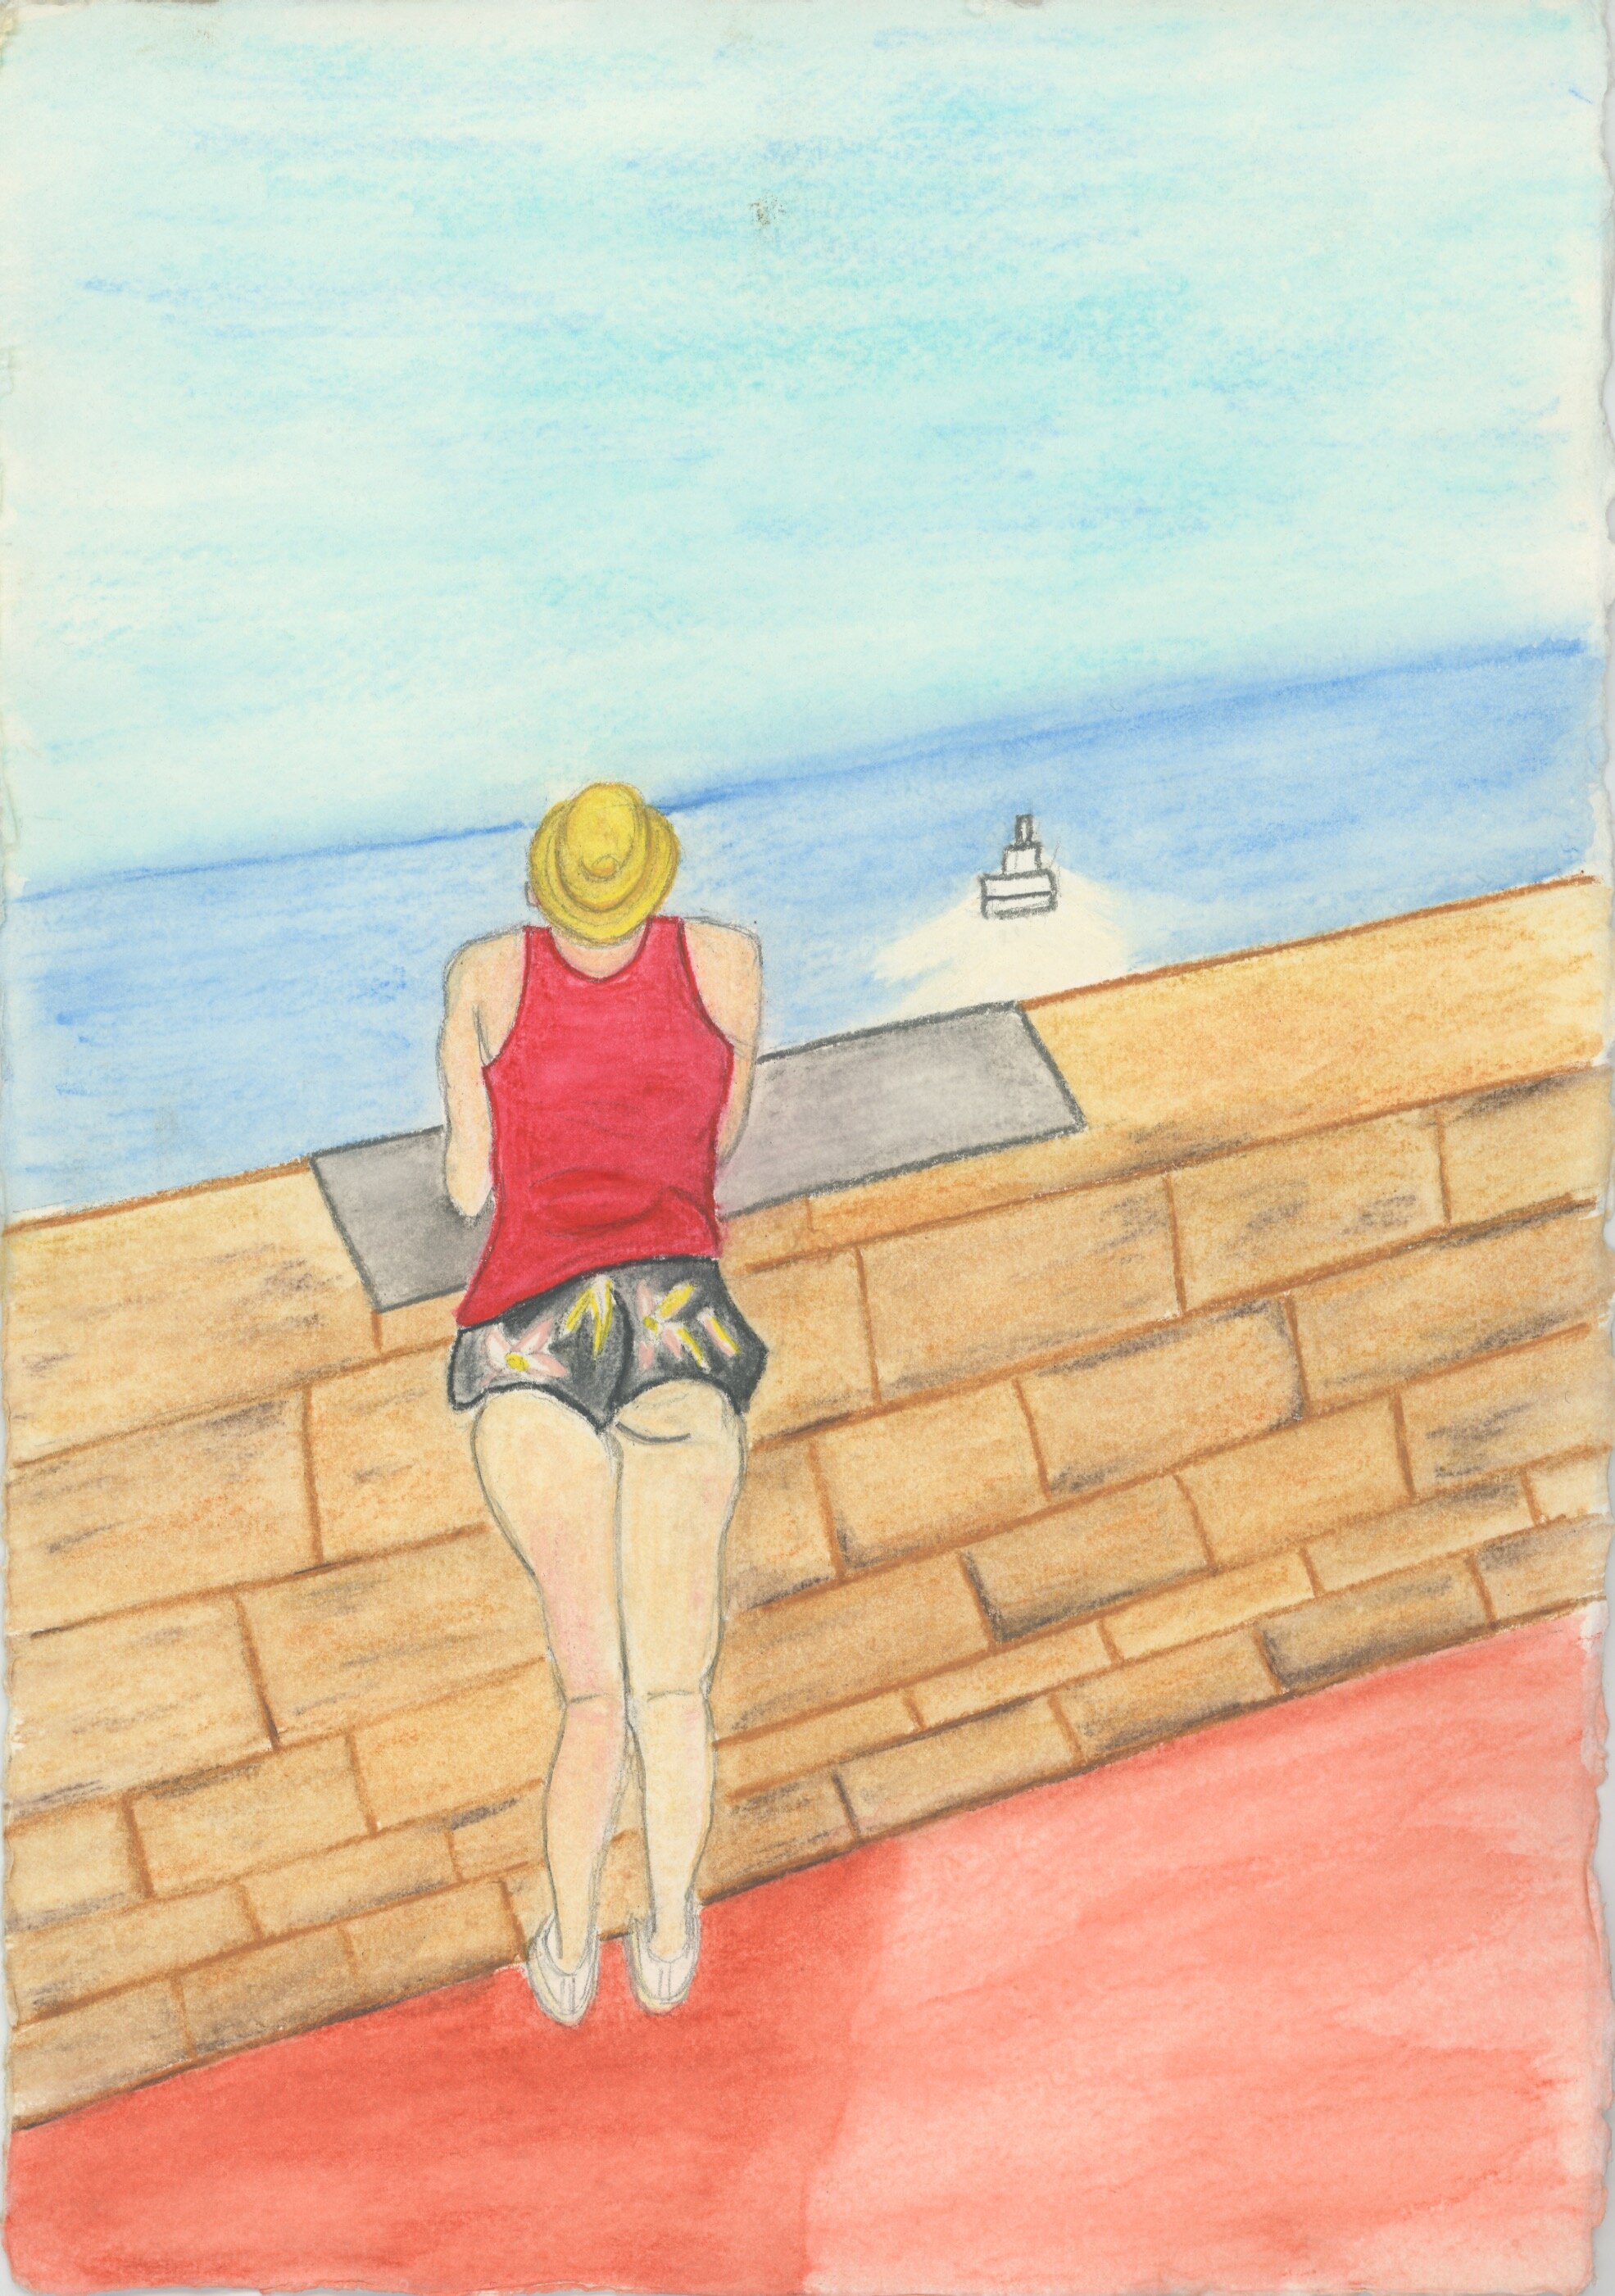 Woman looking into the horizon, 25.5 x 30 cm, 2019